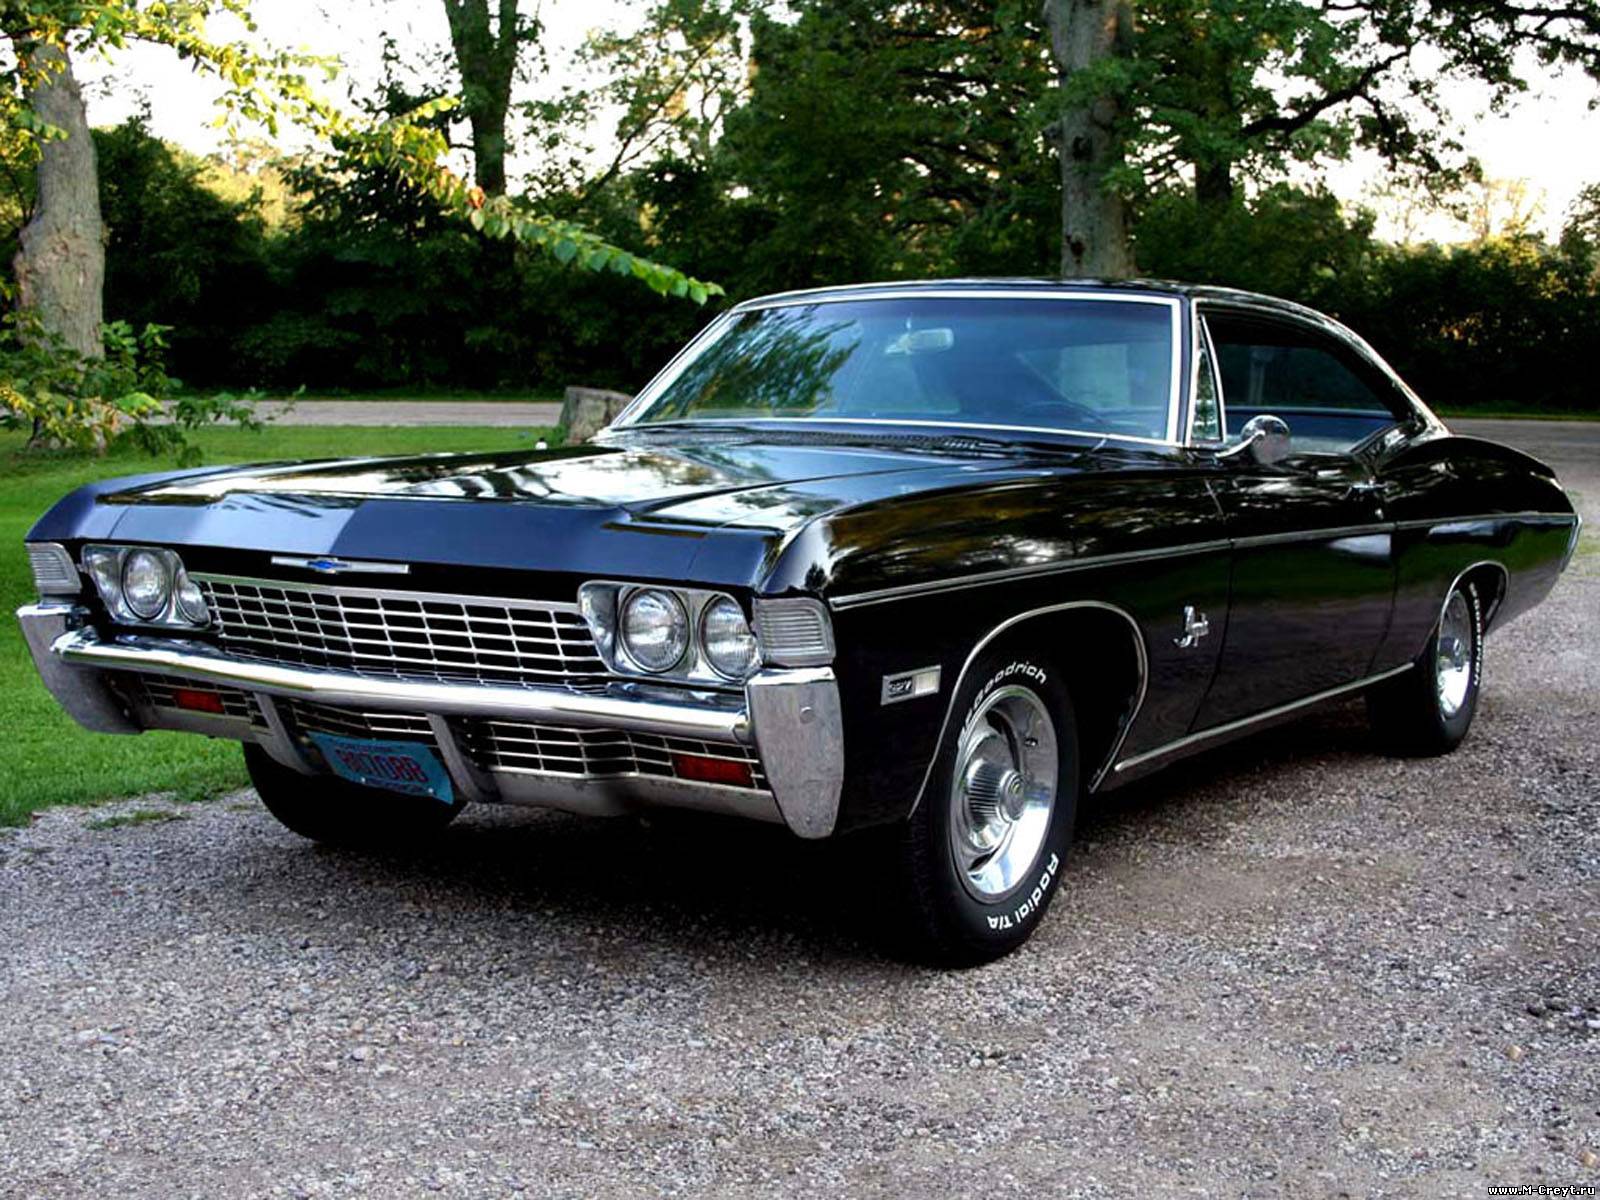 Best 1967 Chevy Impala Have Cbbfcffcb on cars with HD